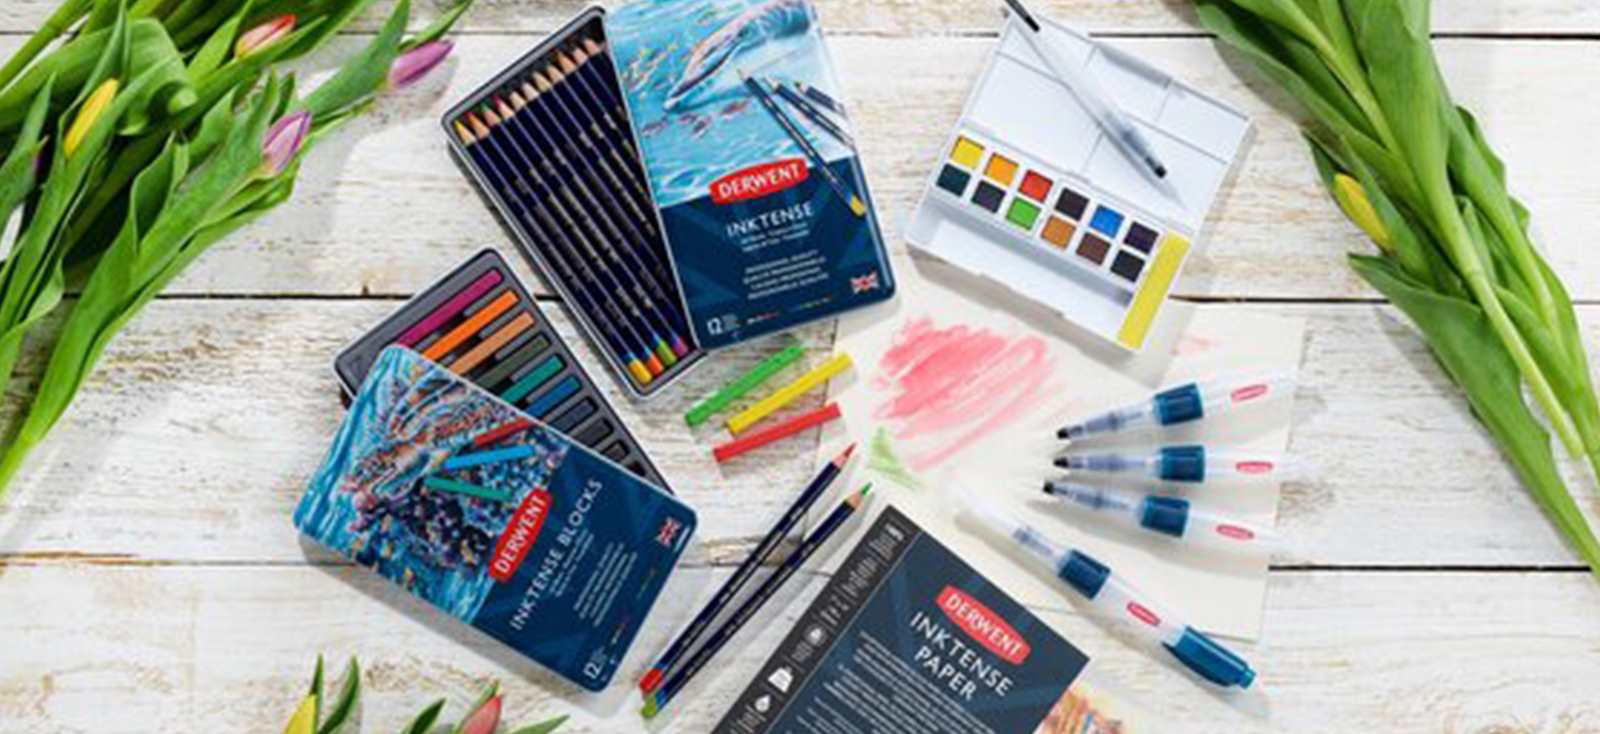 Table spread of Derwent pencils, paint pans and water brushes